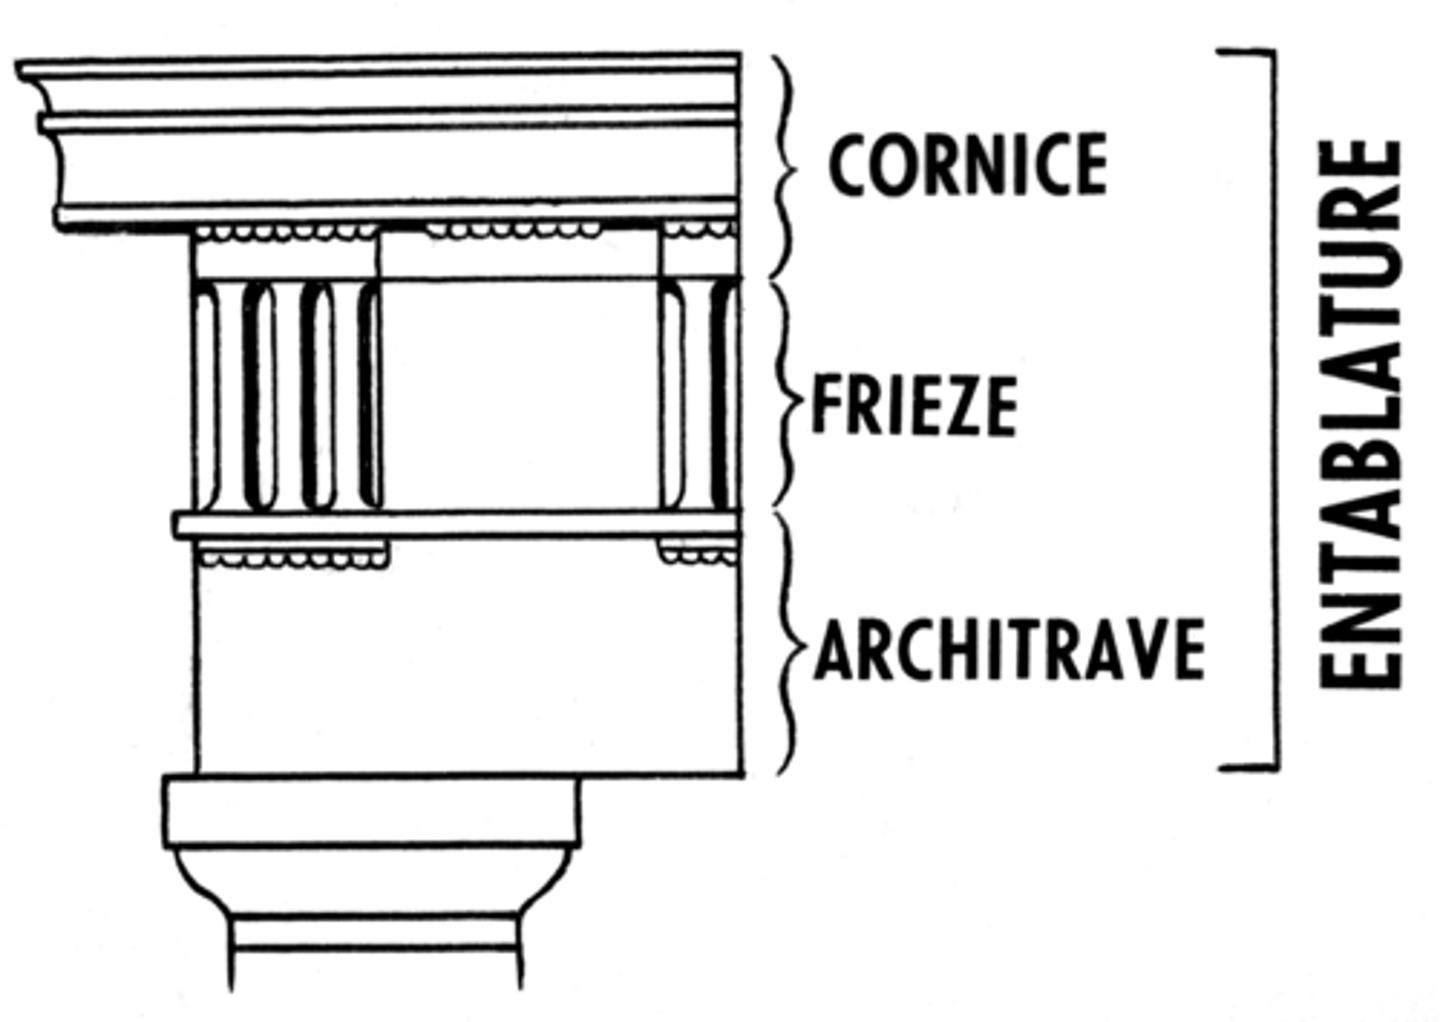 <p>a horizontal, continuous lintel on a classical building supported by columns or a wall, comprising the architrave, frieze, and cornice.</p>